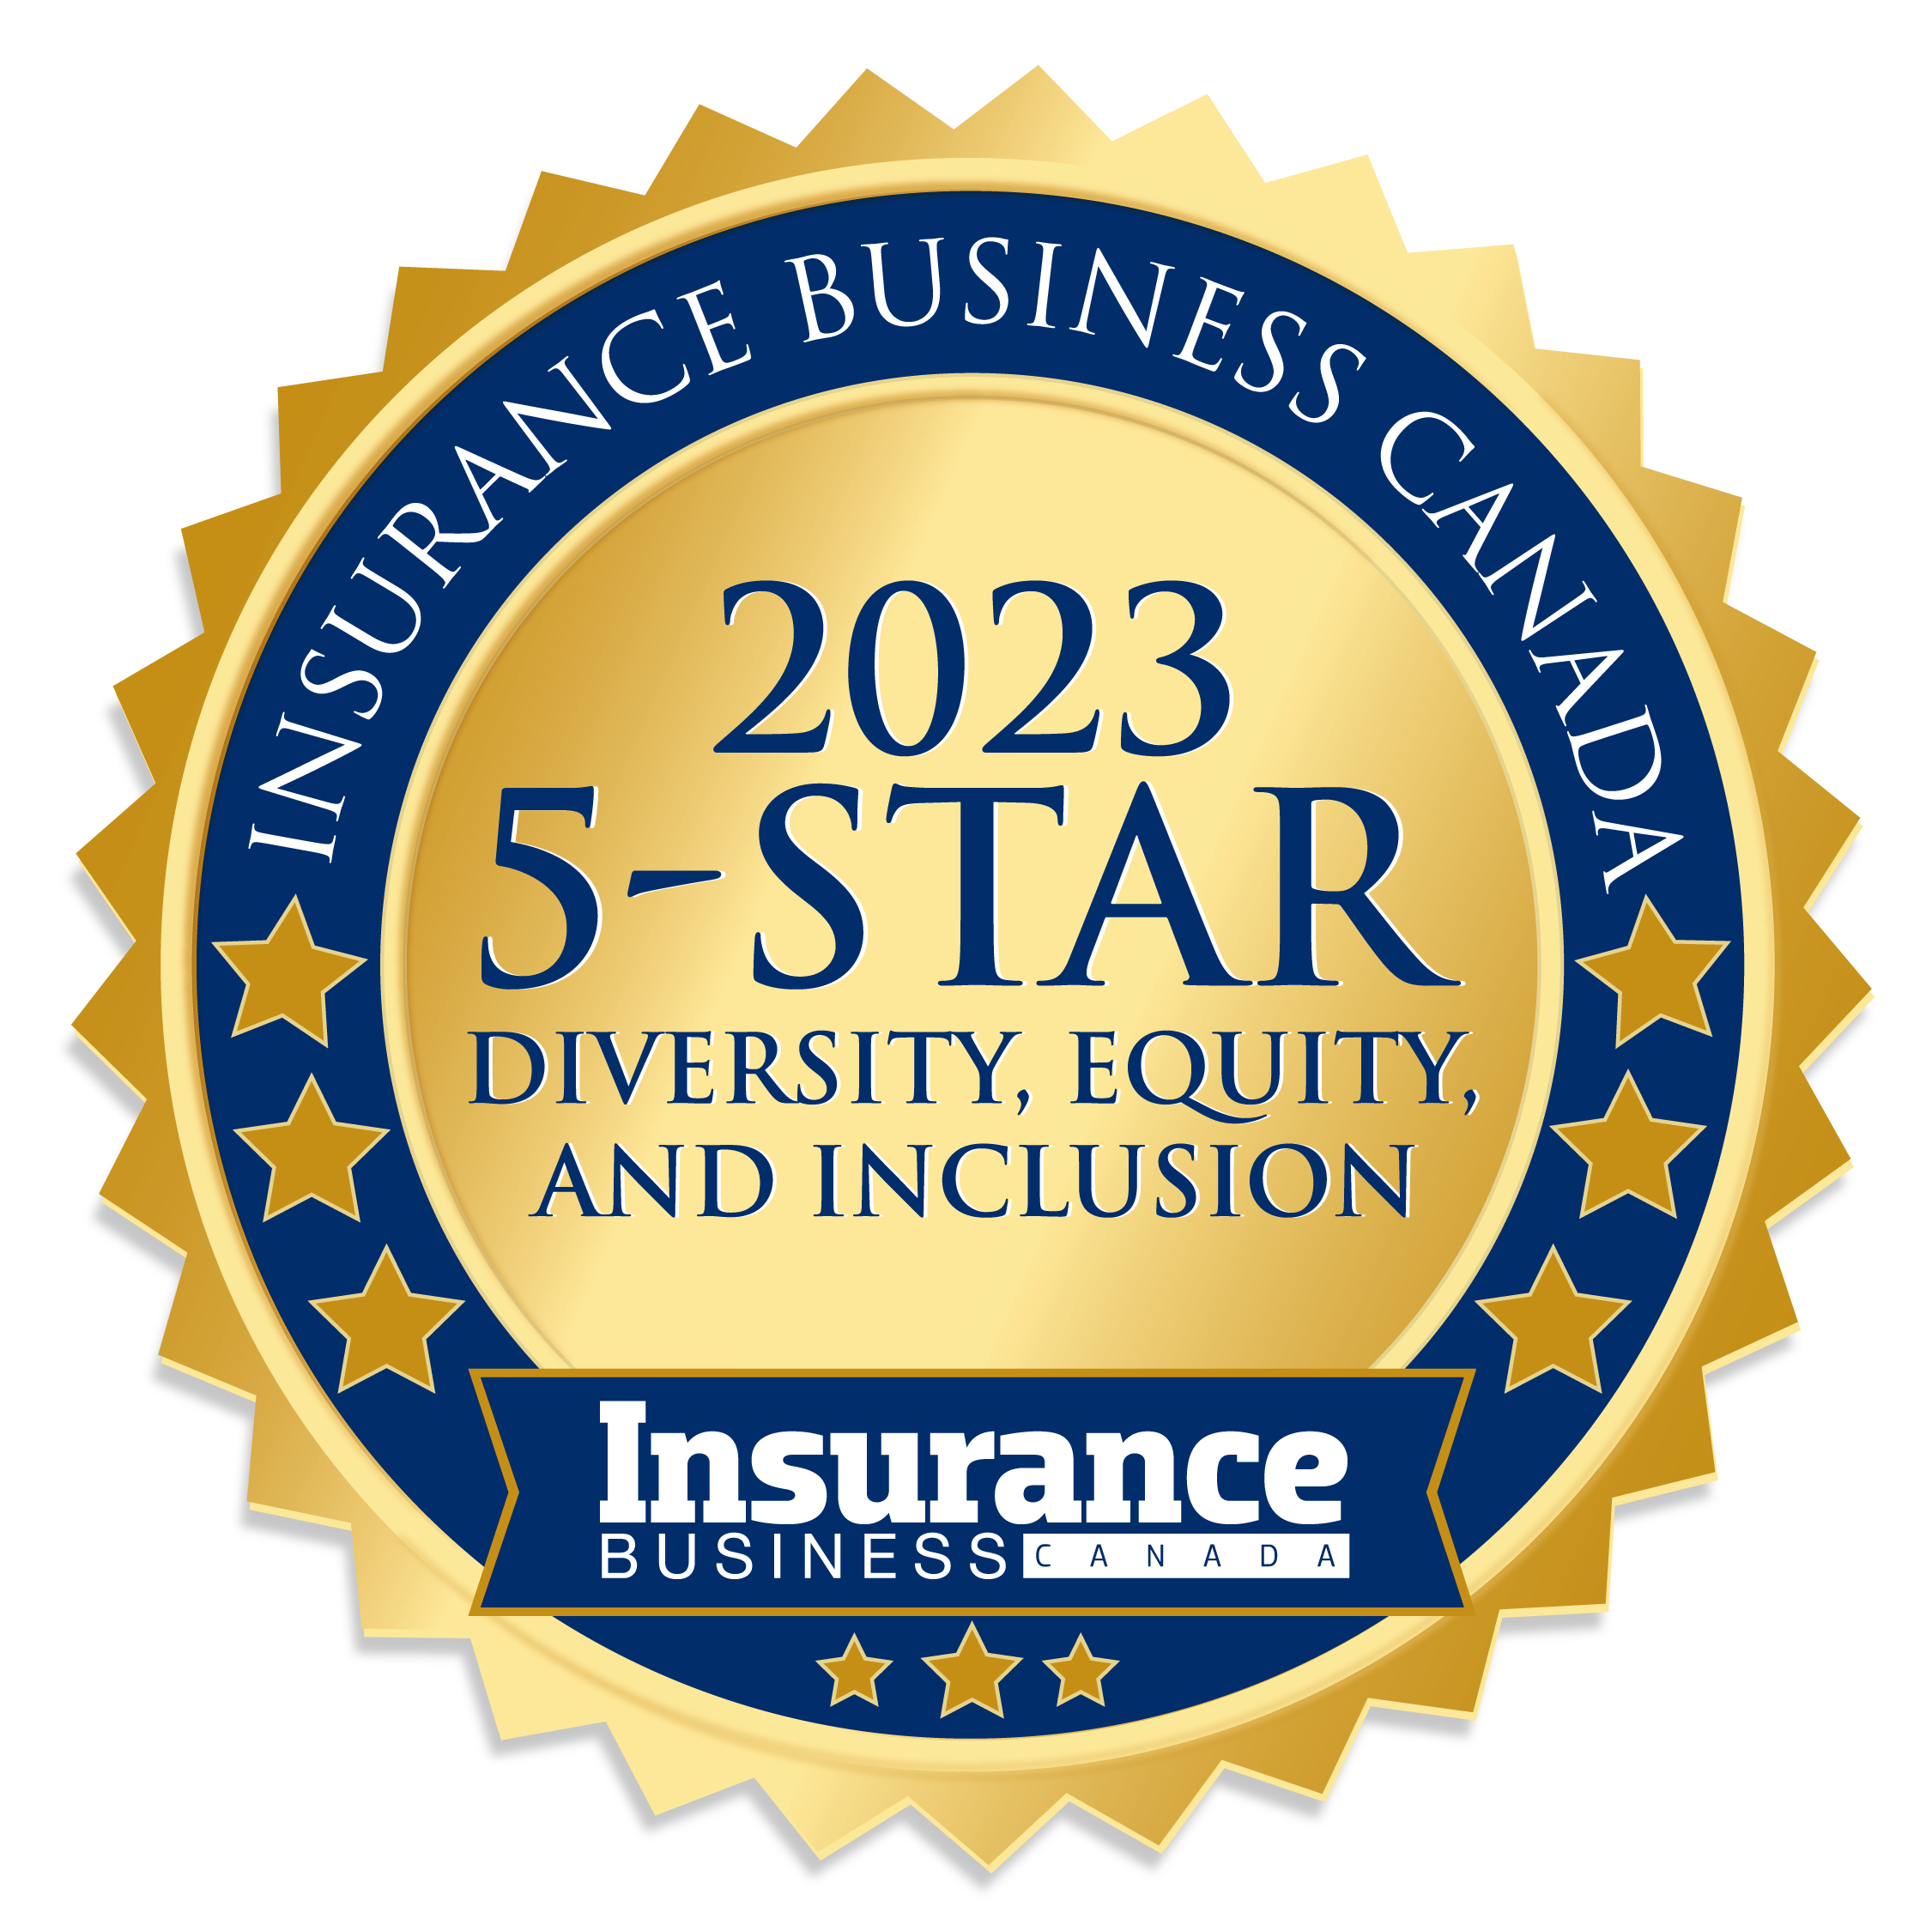 5-Star Diversity, Equity and Inclusion